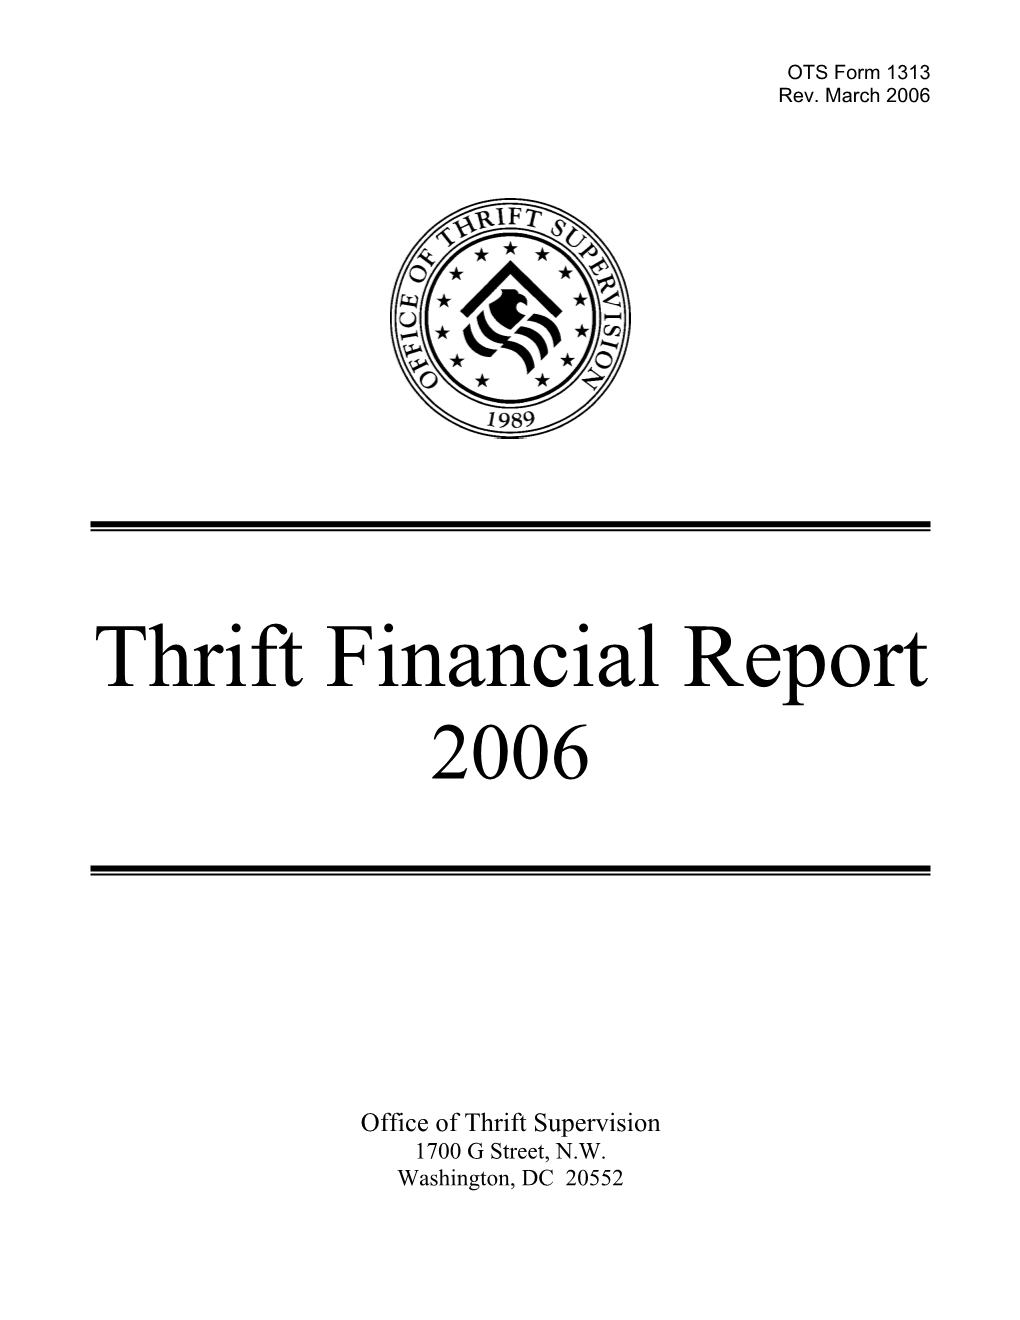 Thrift Financial Report Forms, 2006